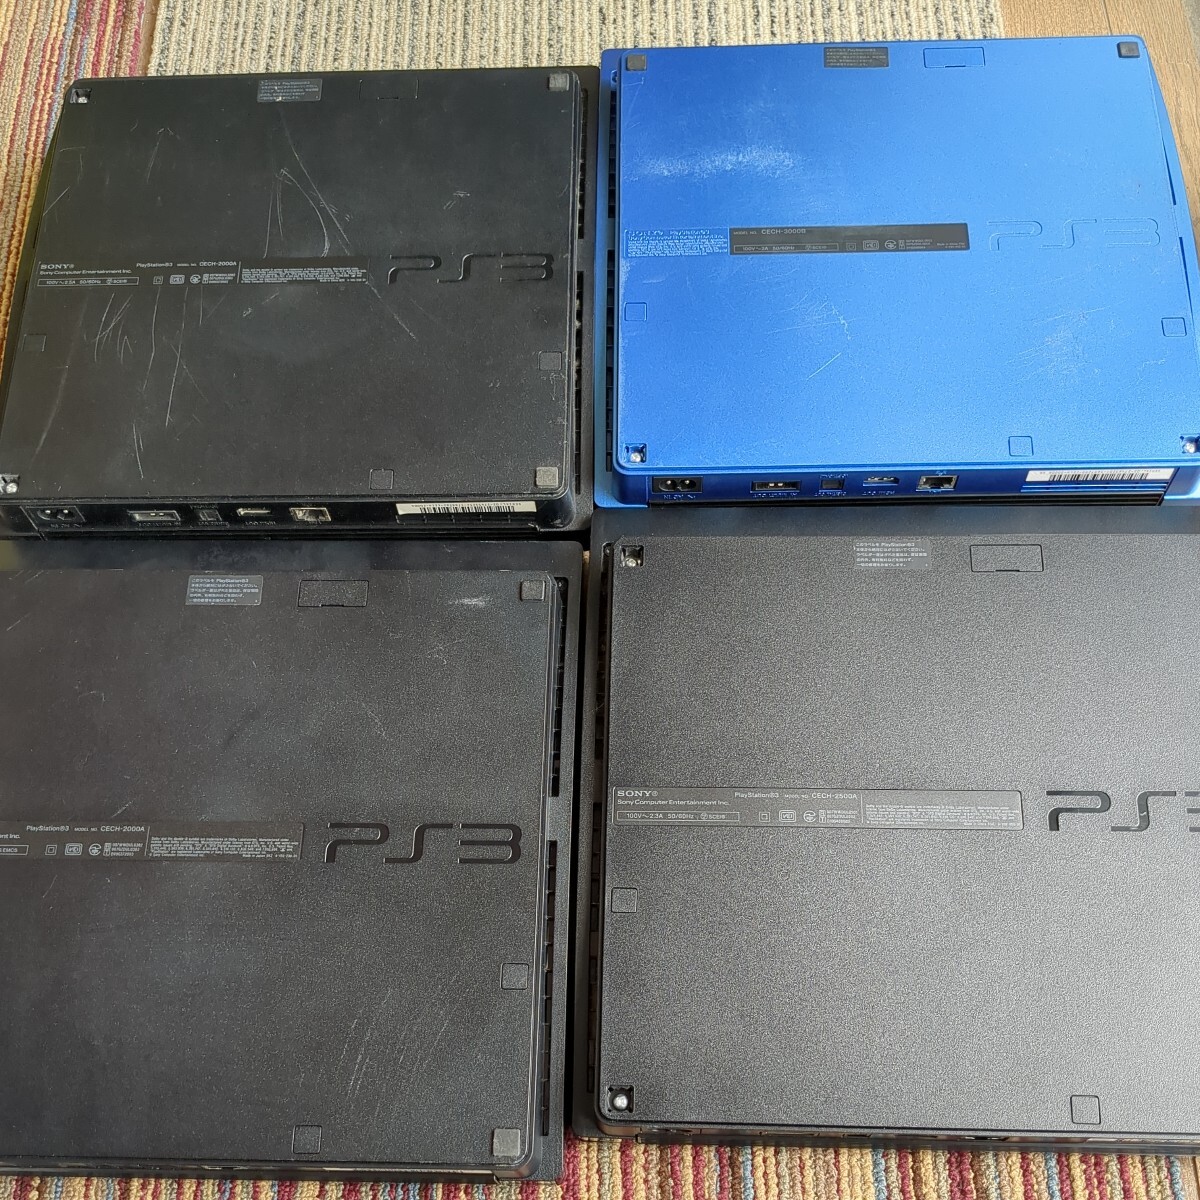  Junk game machine body SONY PS3 CECH 2000A 2500A 3000B 6 pcs set sale together Sony PlayStation 3. seal seal equipped 